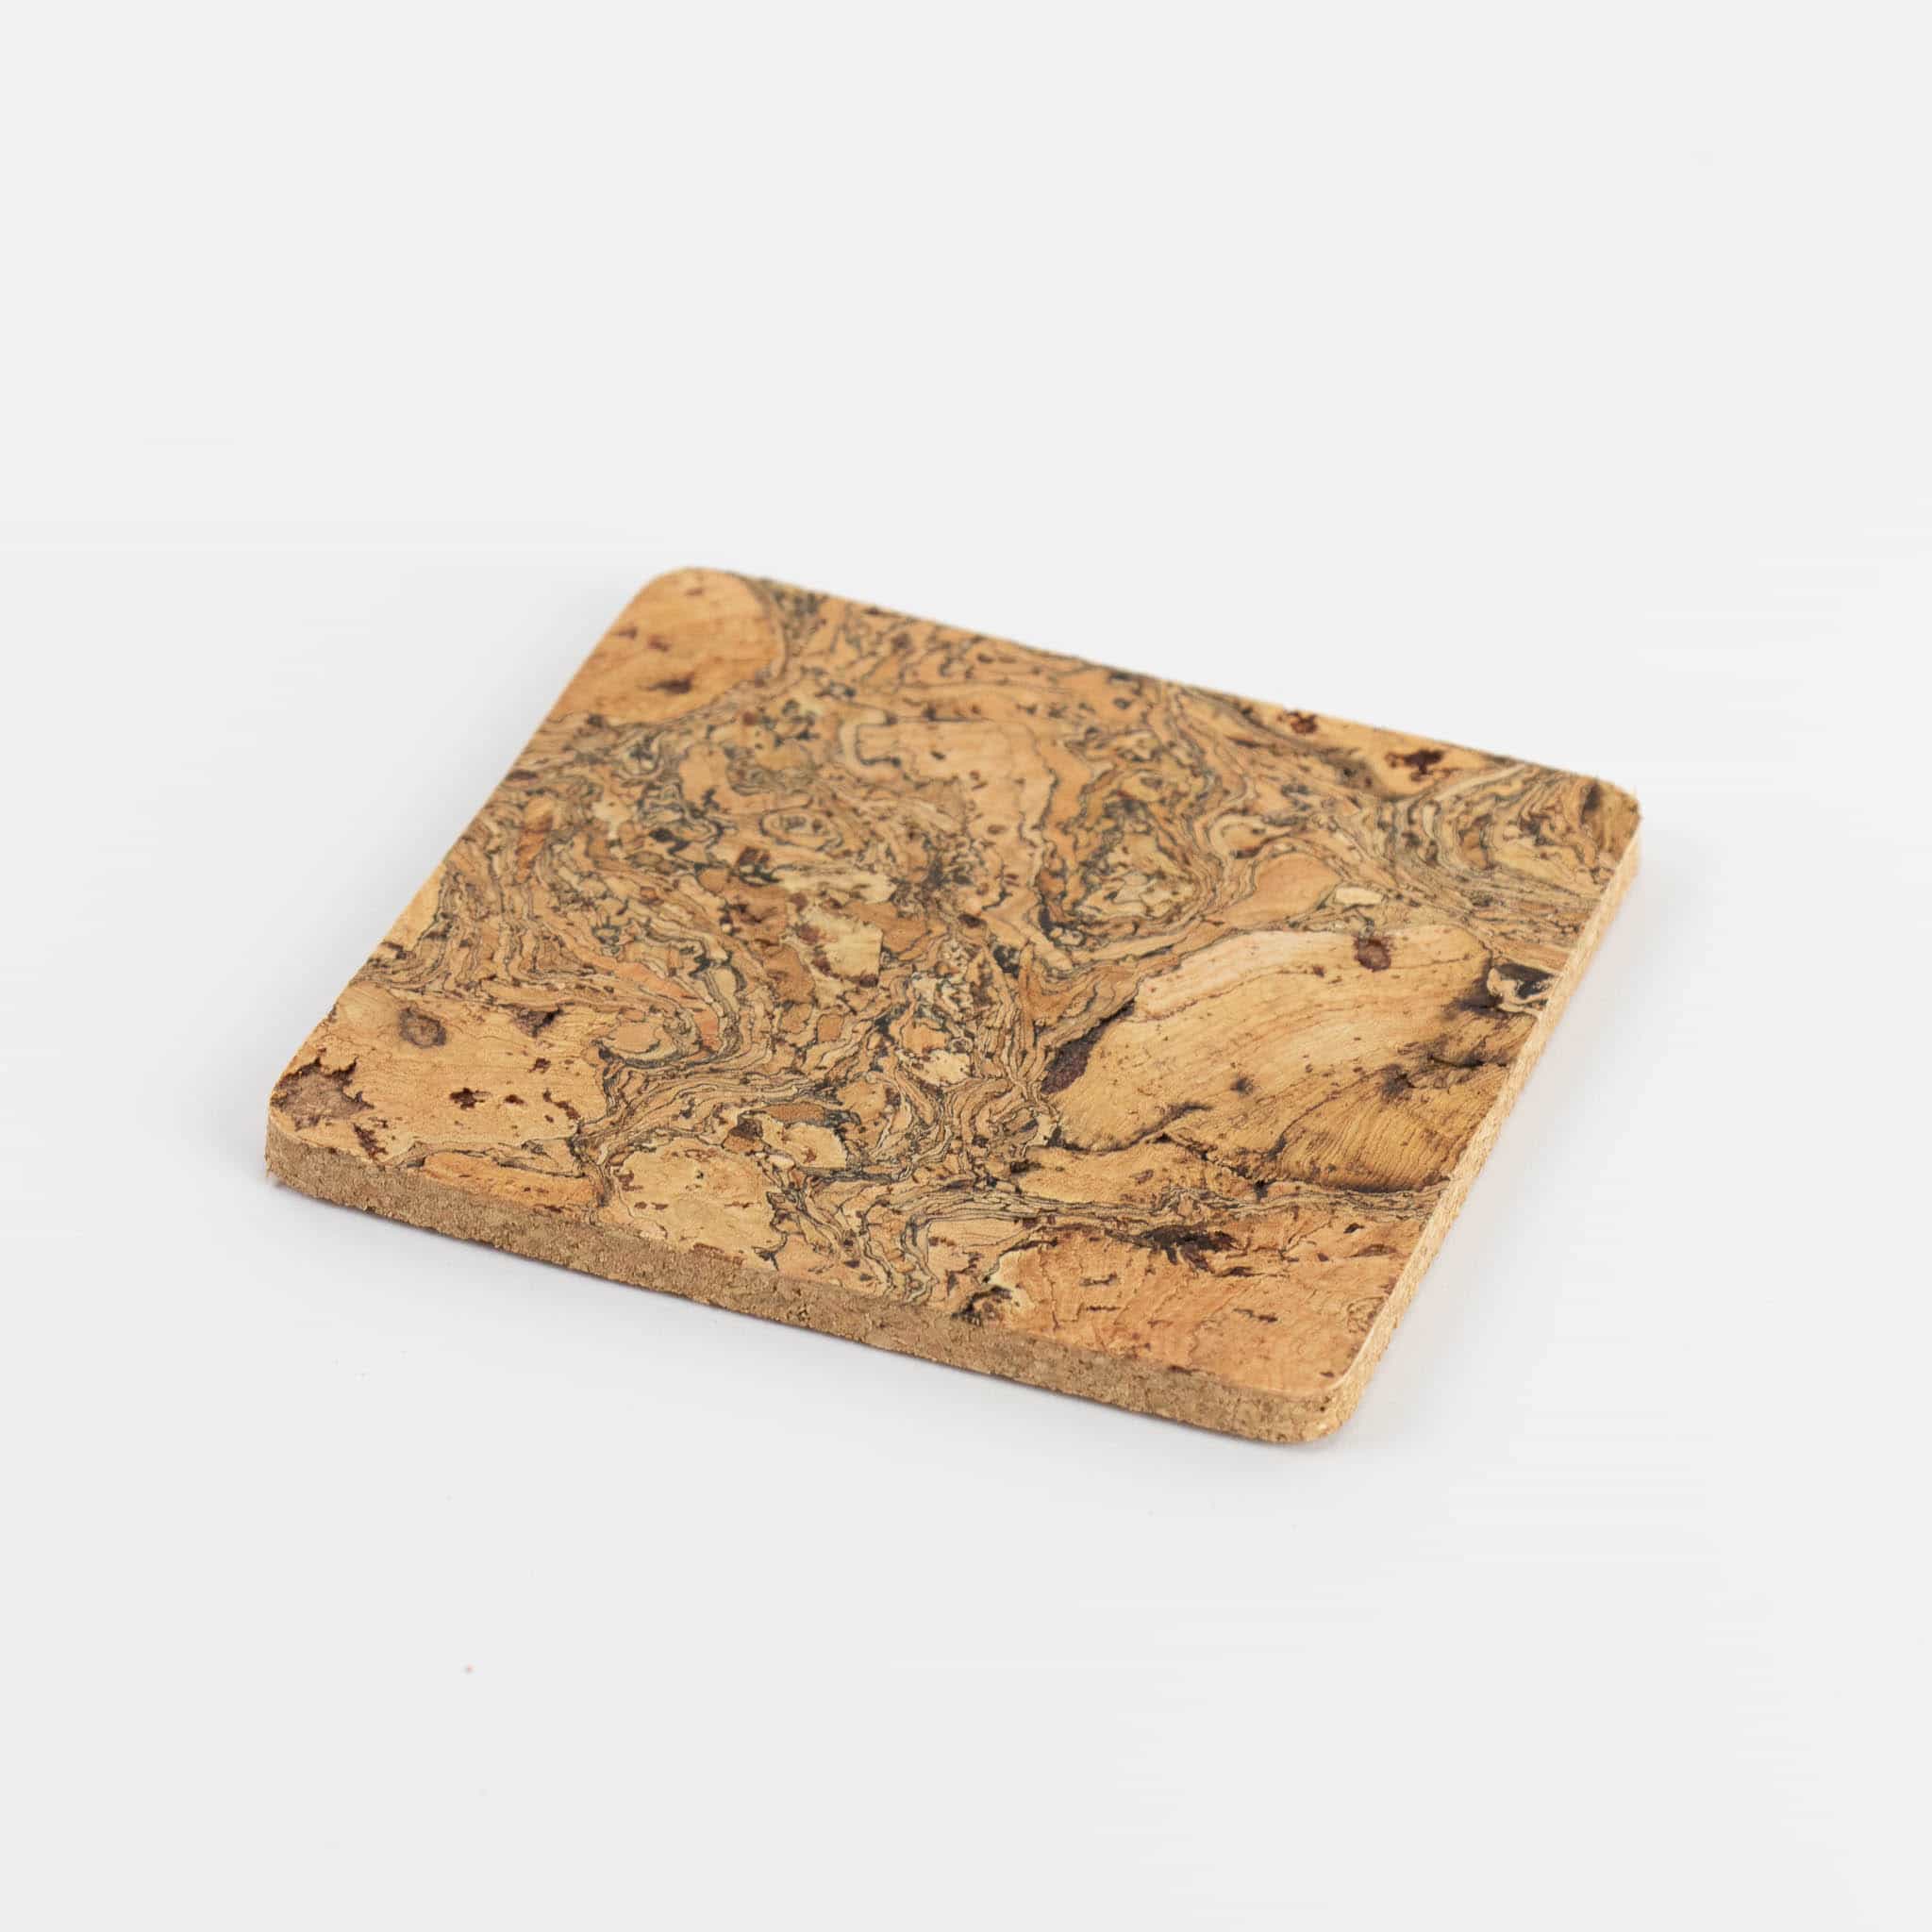 Set of 4 Marbled Cork Square Coasters, 9cm